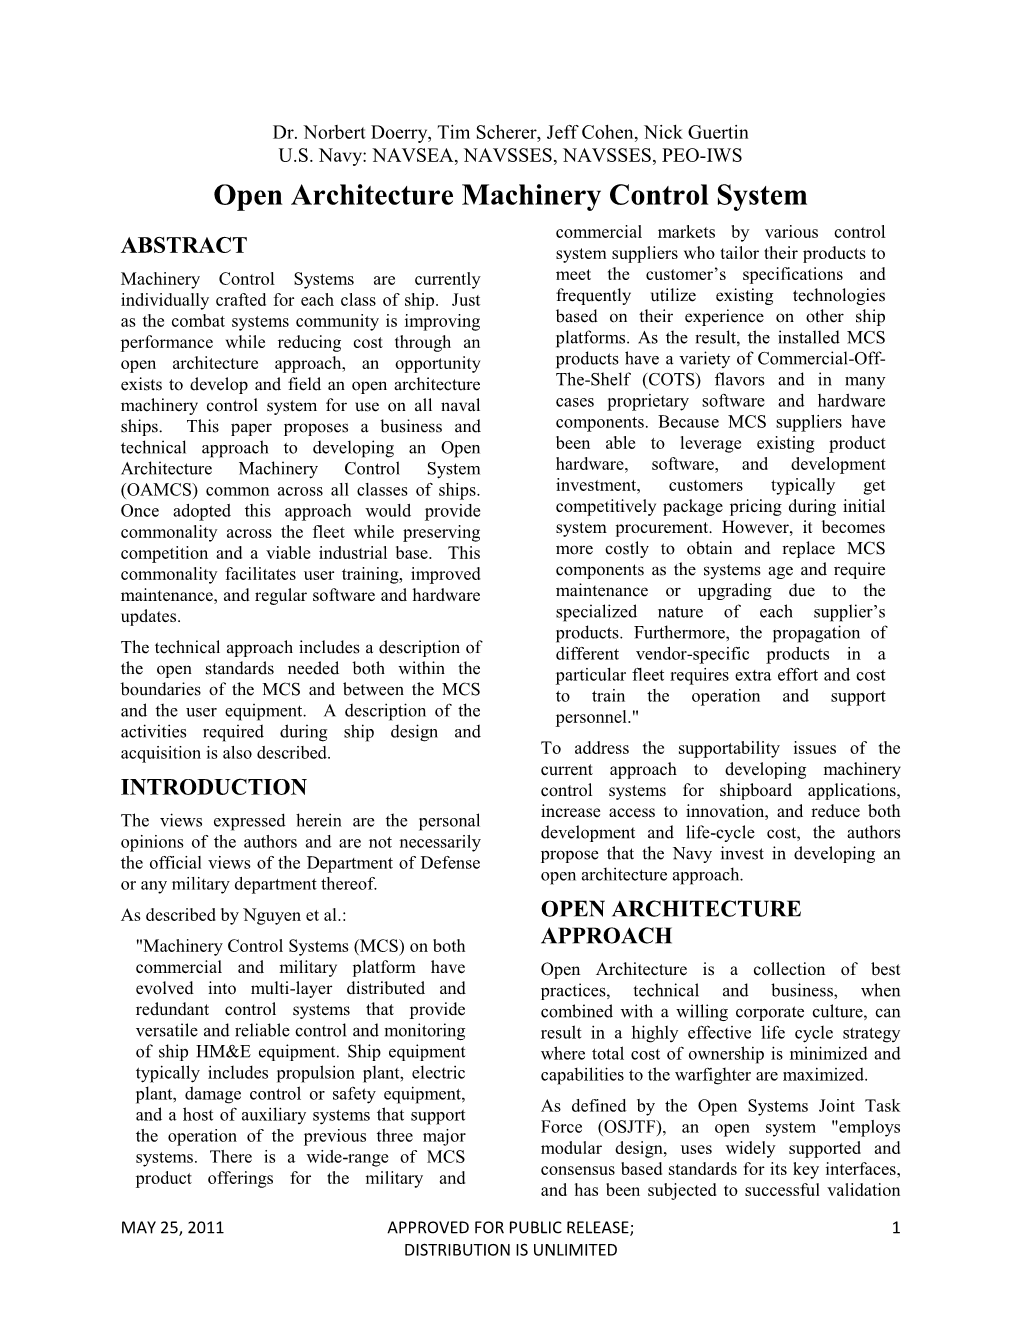 Open Architecture Machinery Control System